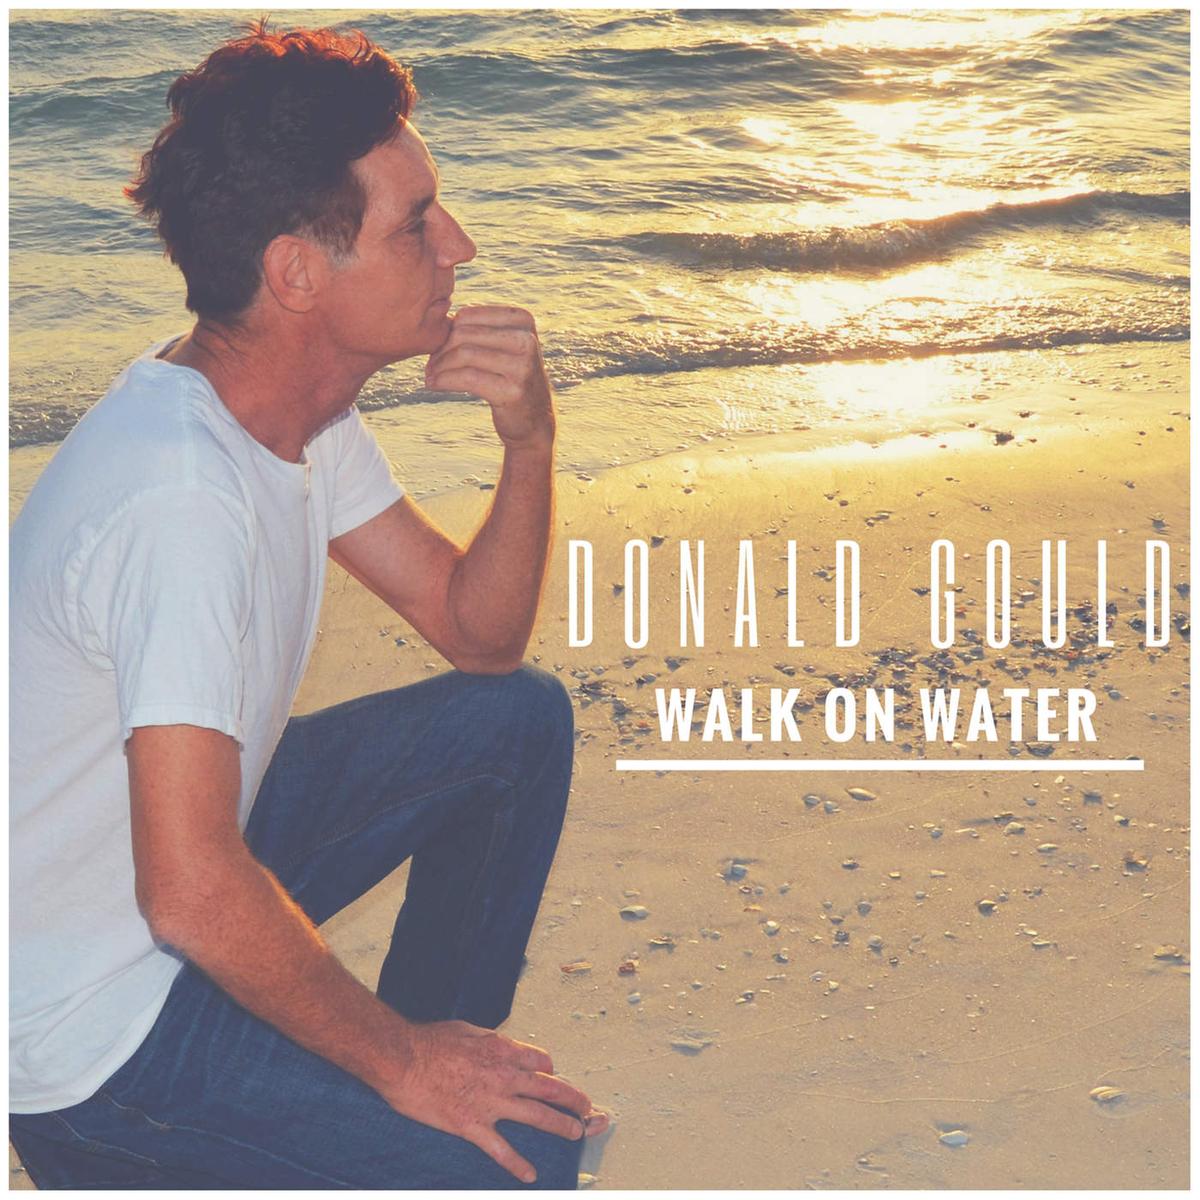 Donald Gould's 2017 album "Walk On Water" (Courtesy of <a href="https://www.facebook.com/donaldboonegould/">Donald Gould</a>)